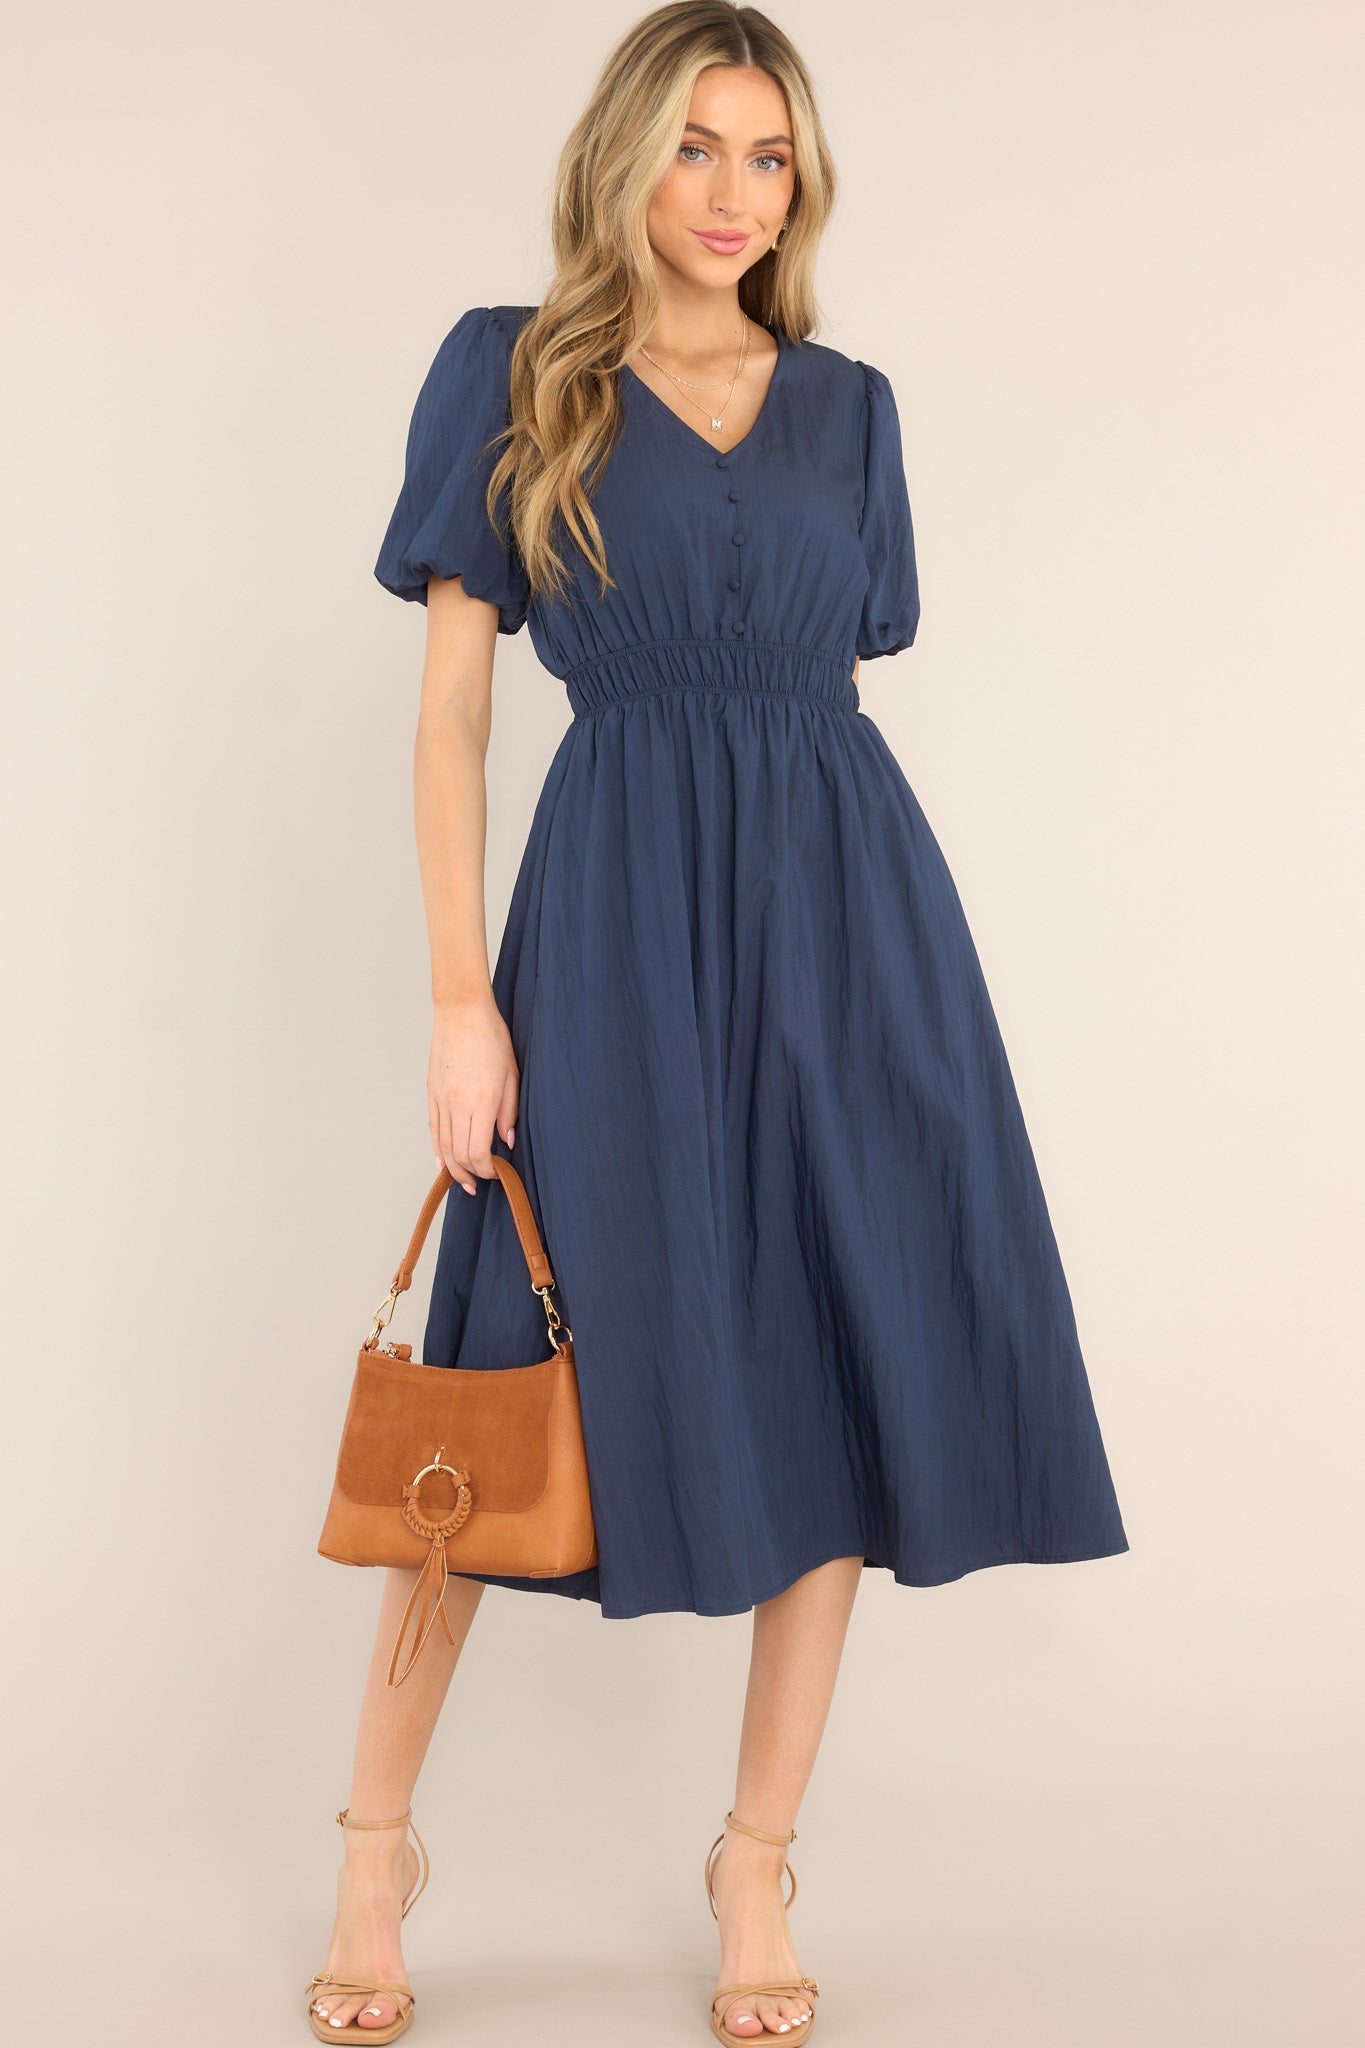 This all navy blue dress is featuring elastic short sleeves, an elastic waist, a keyhole opening in the back, non-functional buttons down the bust, and a midi length.